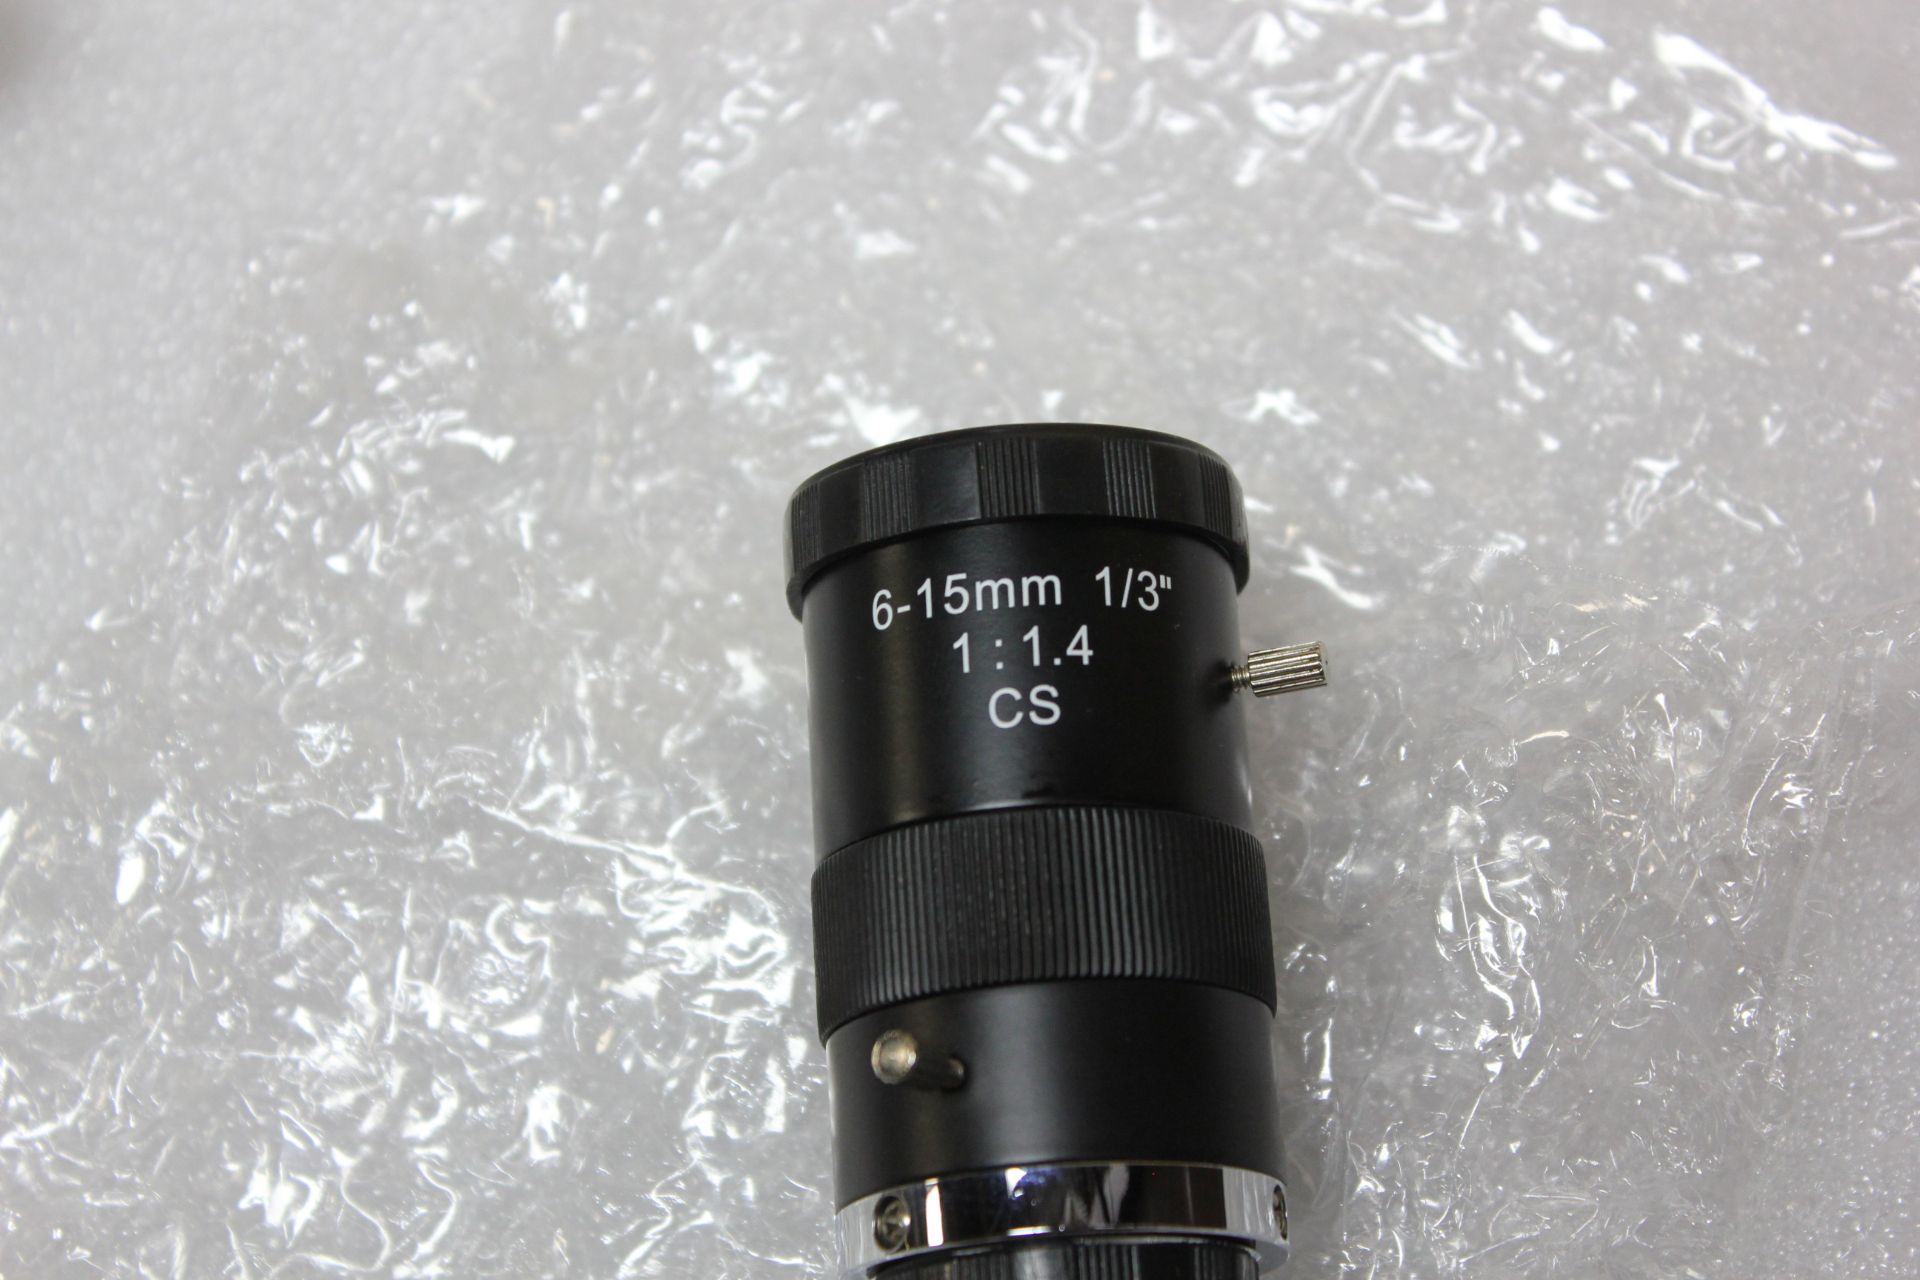 LOT OF NEW MACHINE VISION CAMERA LENSES - Image 5 of 6